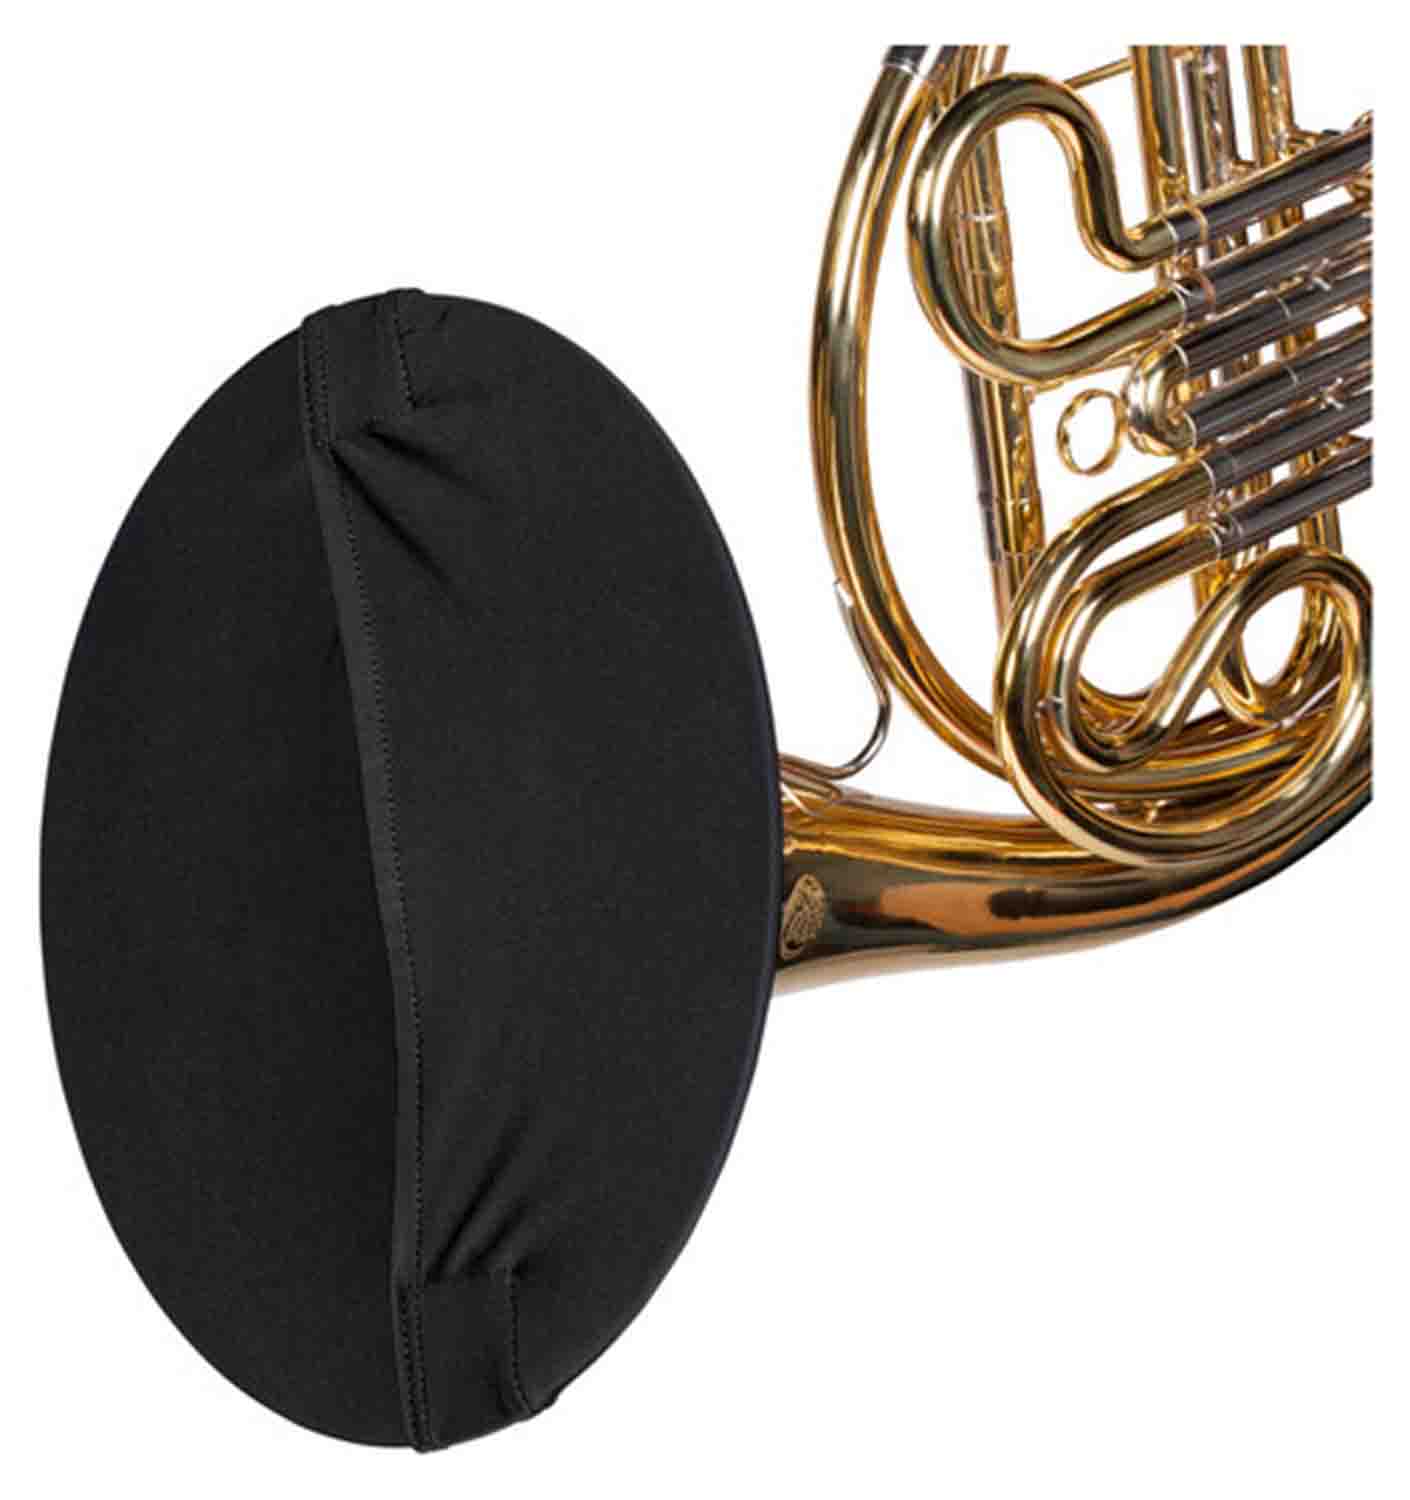 Gator GBELLCVR1113FHBK French Horn Bell Cover with Hand Access 11 to 13" - Black - Hollywood DJ